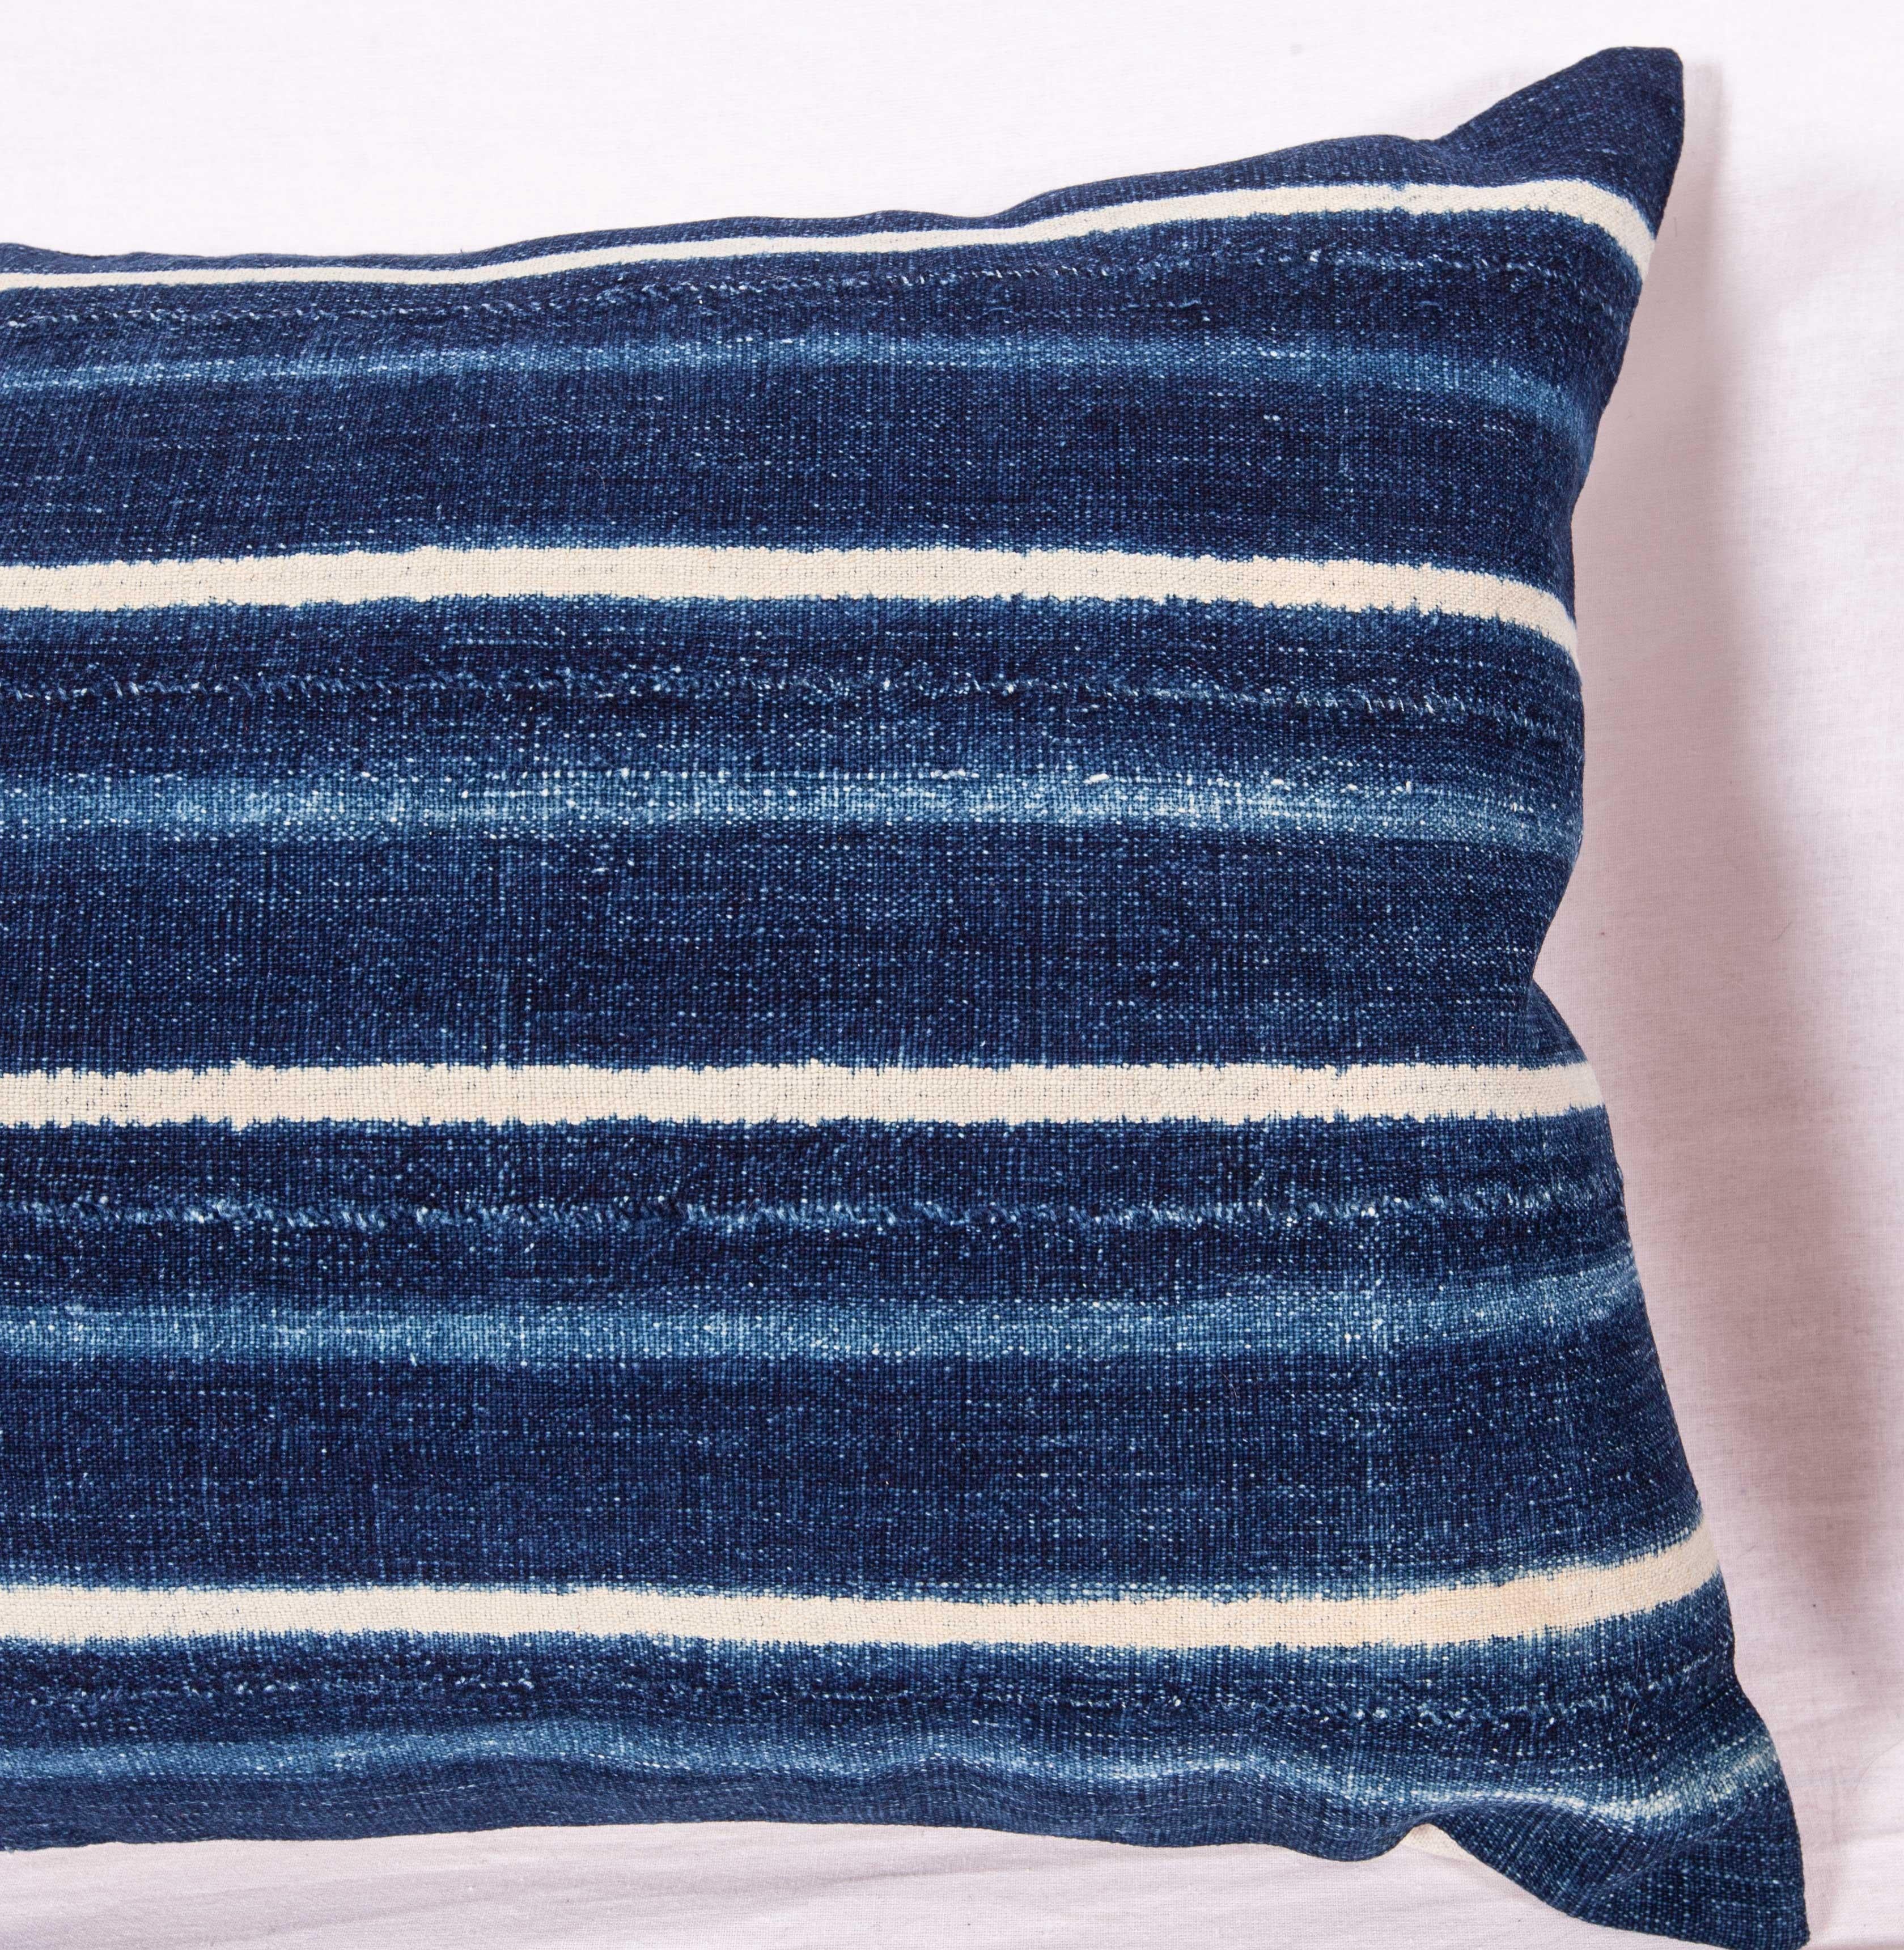 Tribal Vintage Indigo Pillow / Cushion Covers Fashioned from a Cloth from Mali Africa